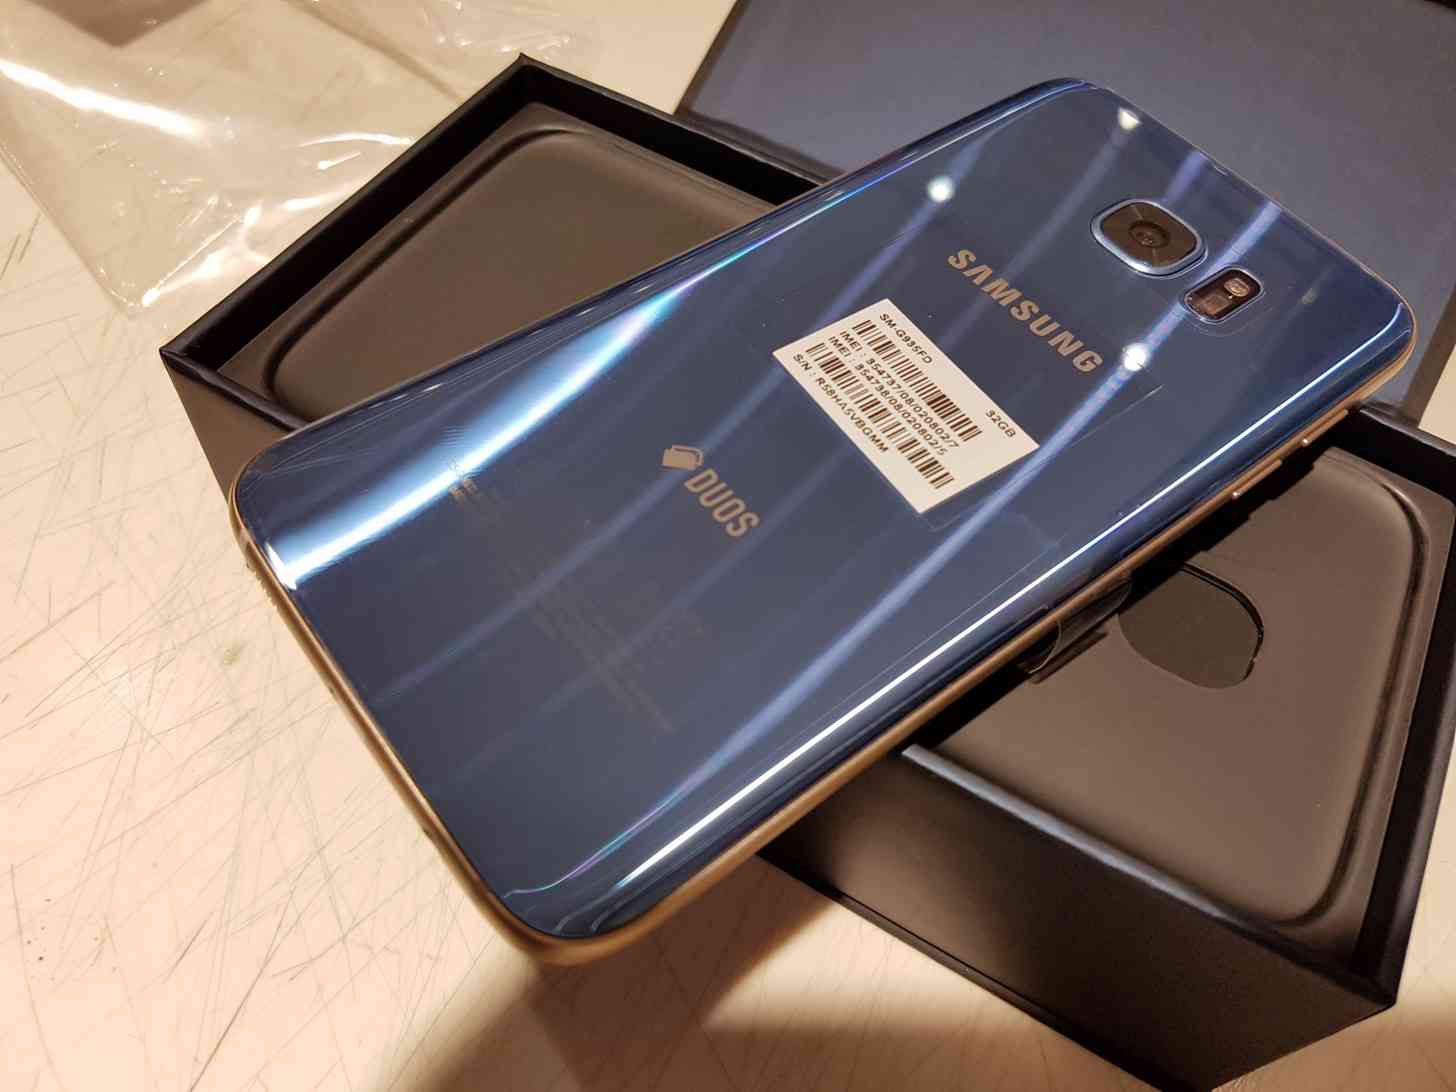 Blue Coral Samsung Galaxy S7 edge unboxing rear